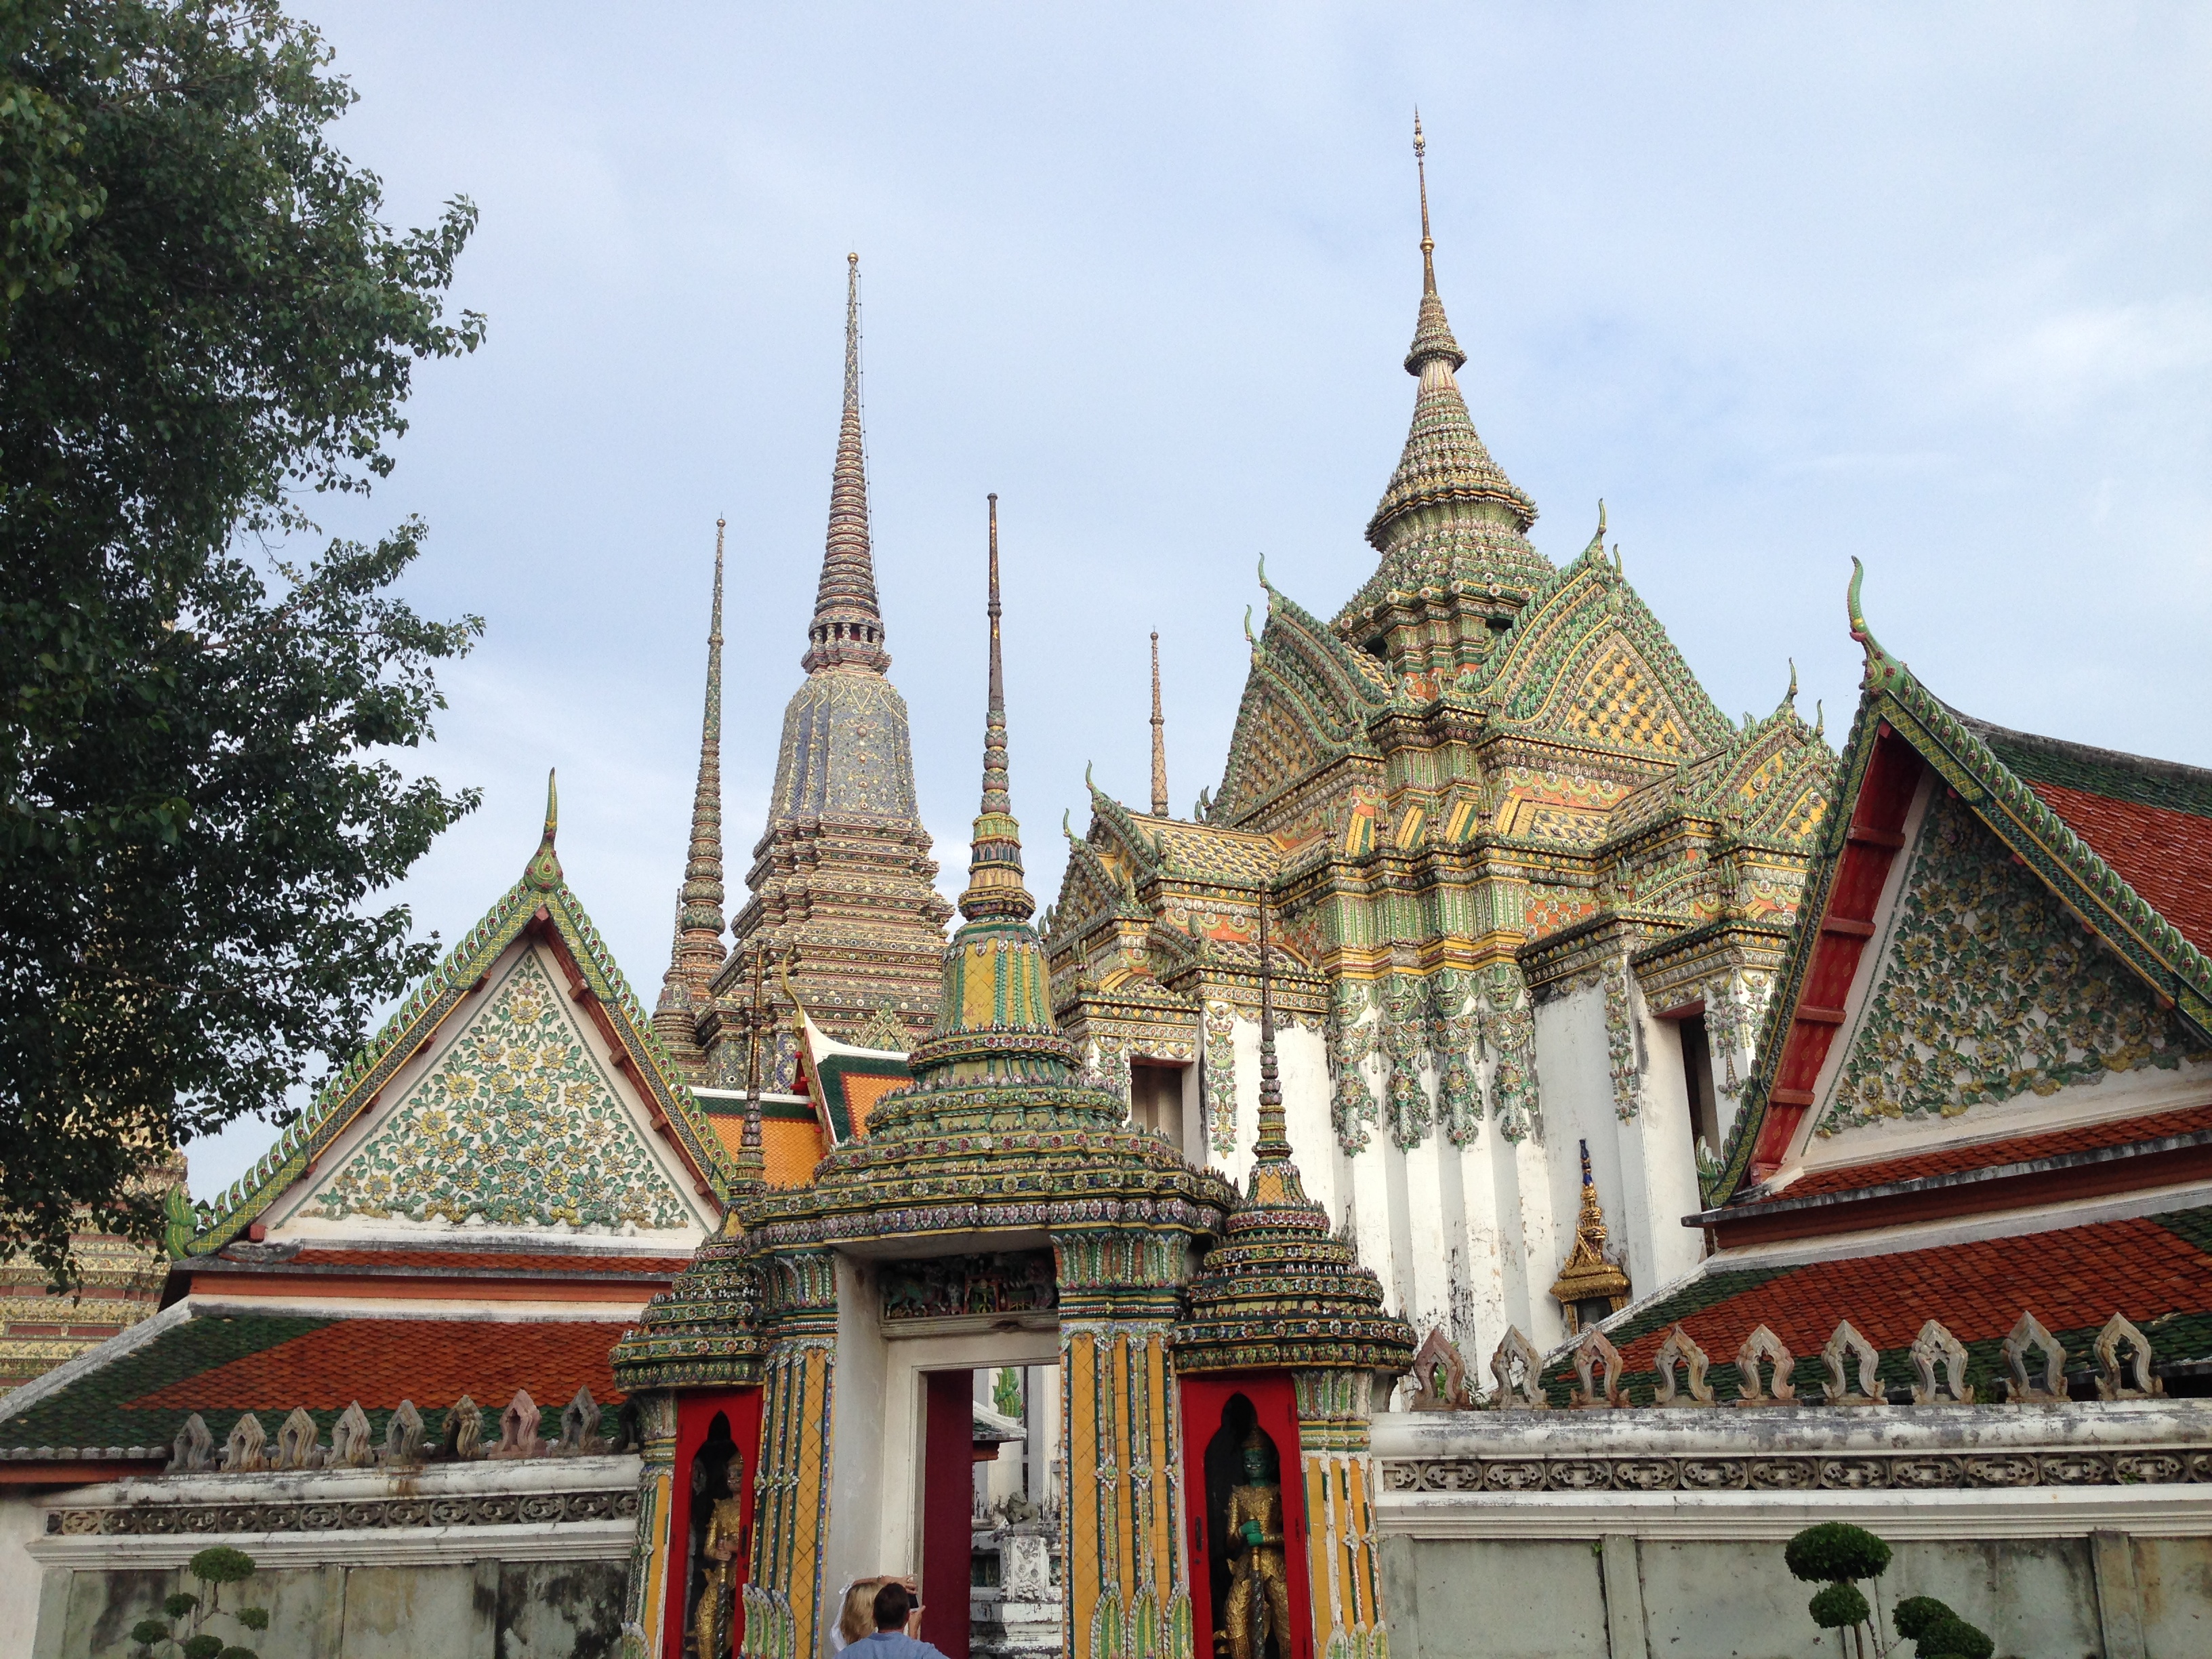 a colorful ornate building with spires with Wat Pho in the background